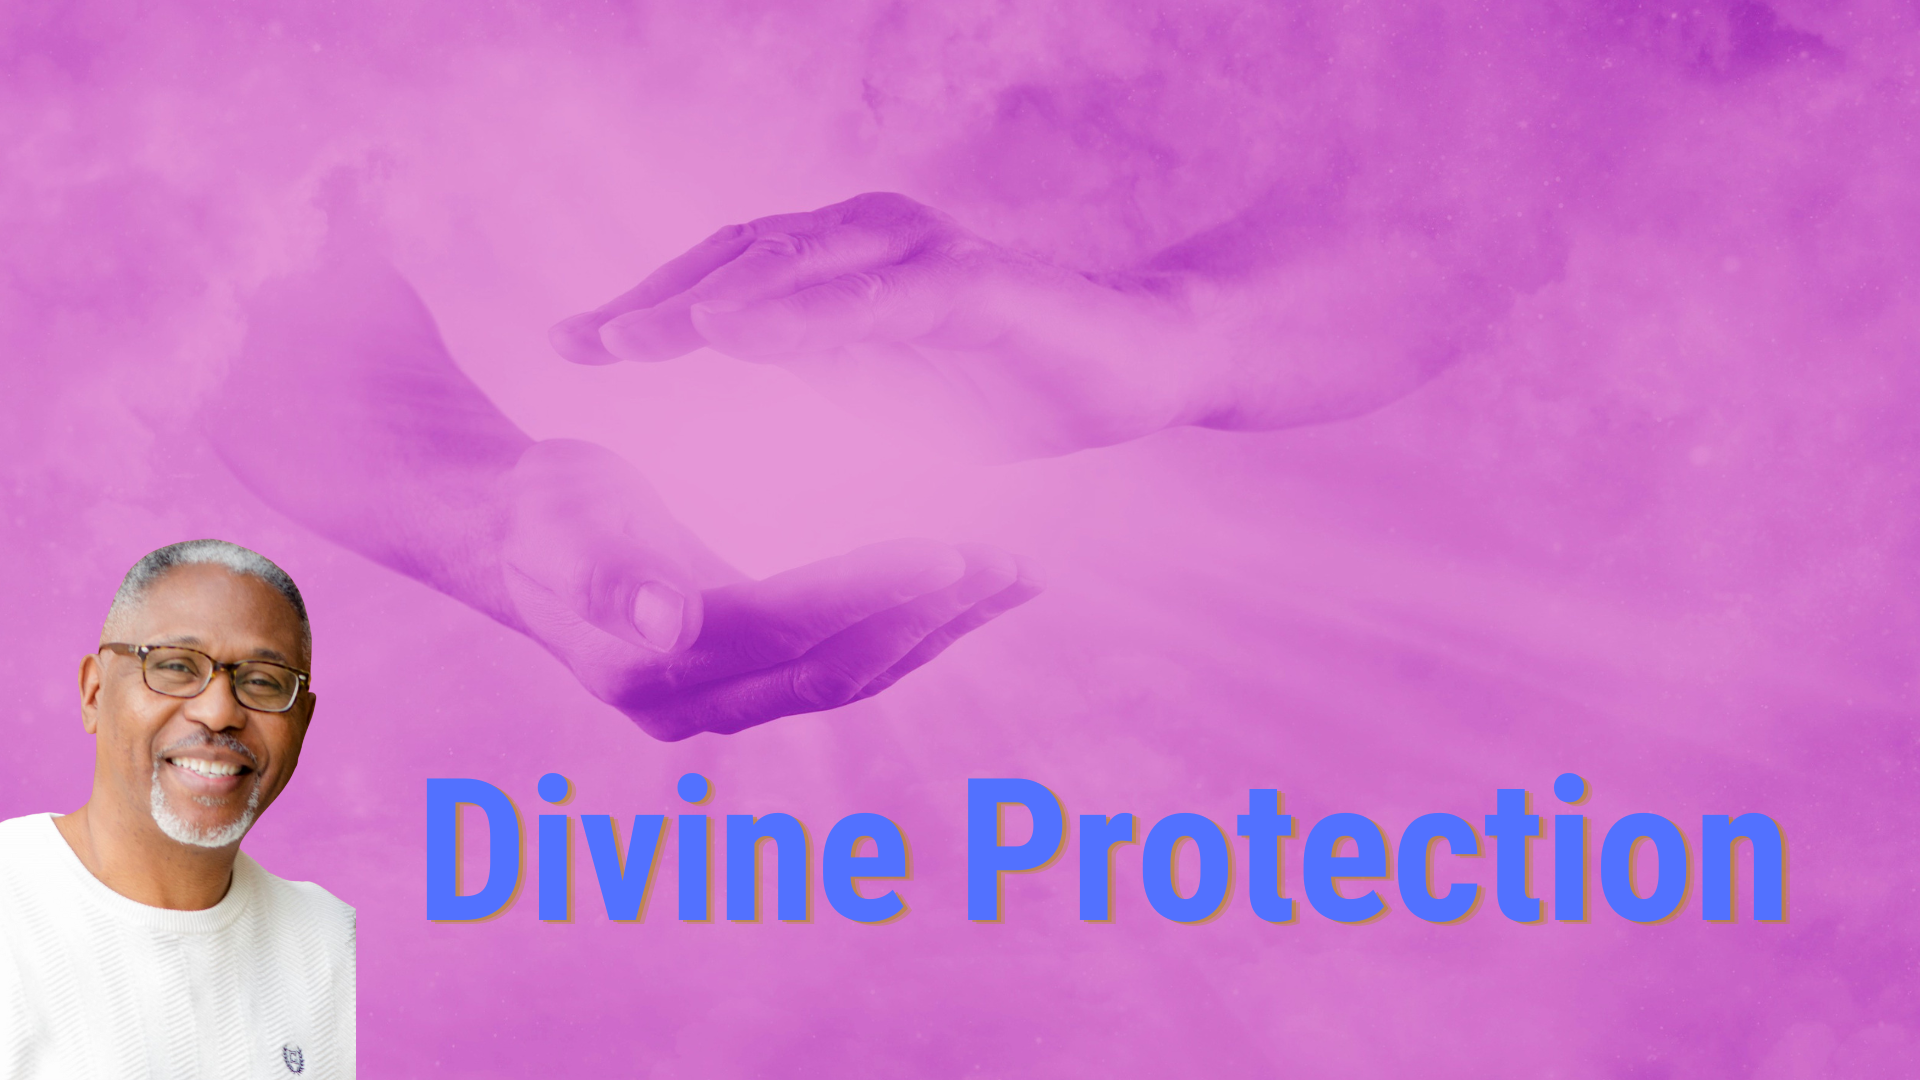 Divine Protection head image